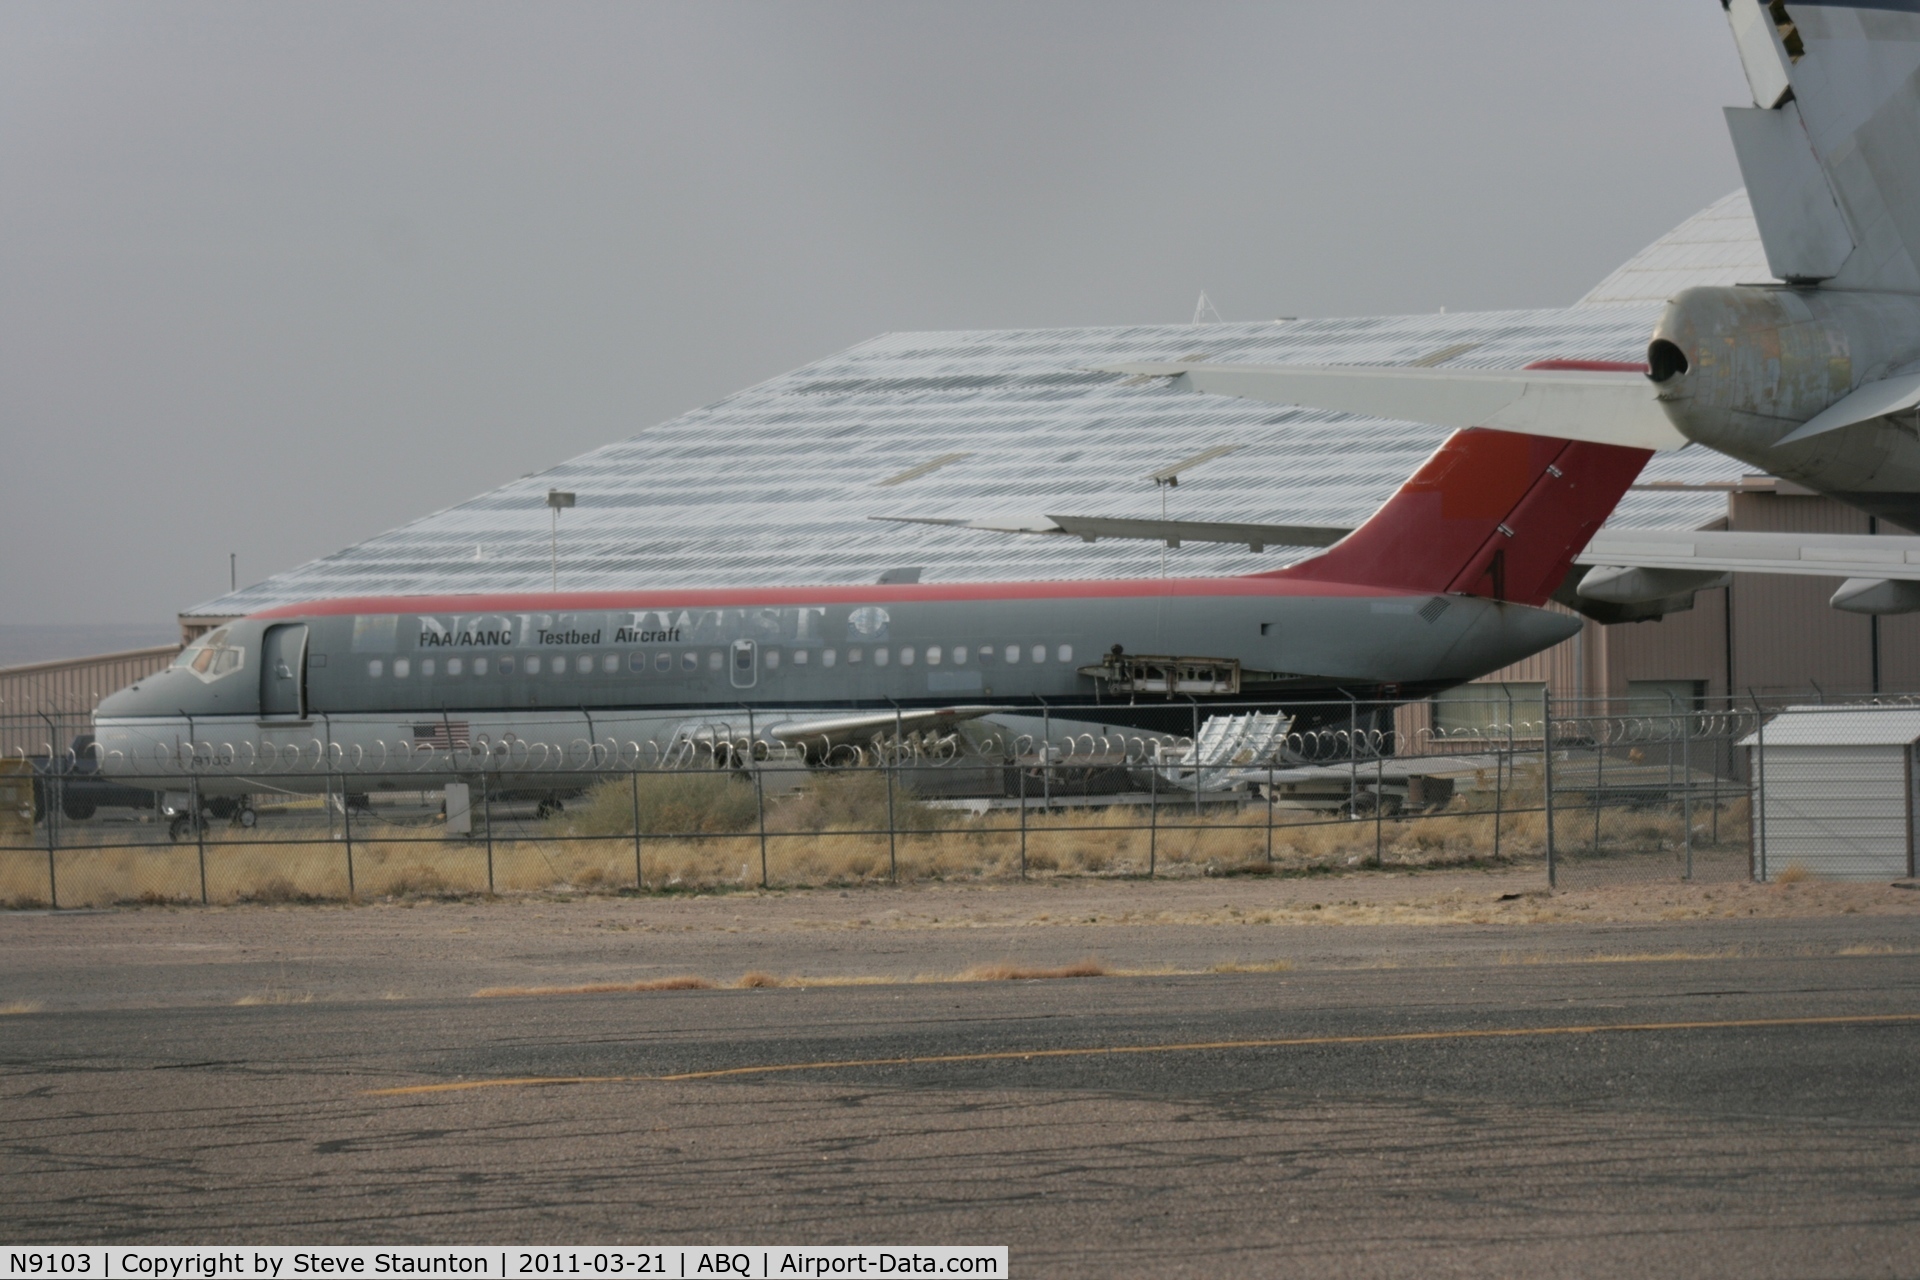 N9103, 1966 Douglas DC-9-14 C/N 45796, Taken at Alburquerque International Sunport Airport, New Mexico in March 2011 whilst on an Aeroprint Aviation tour